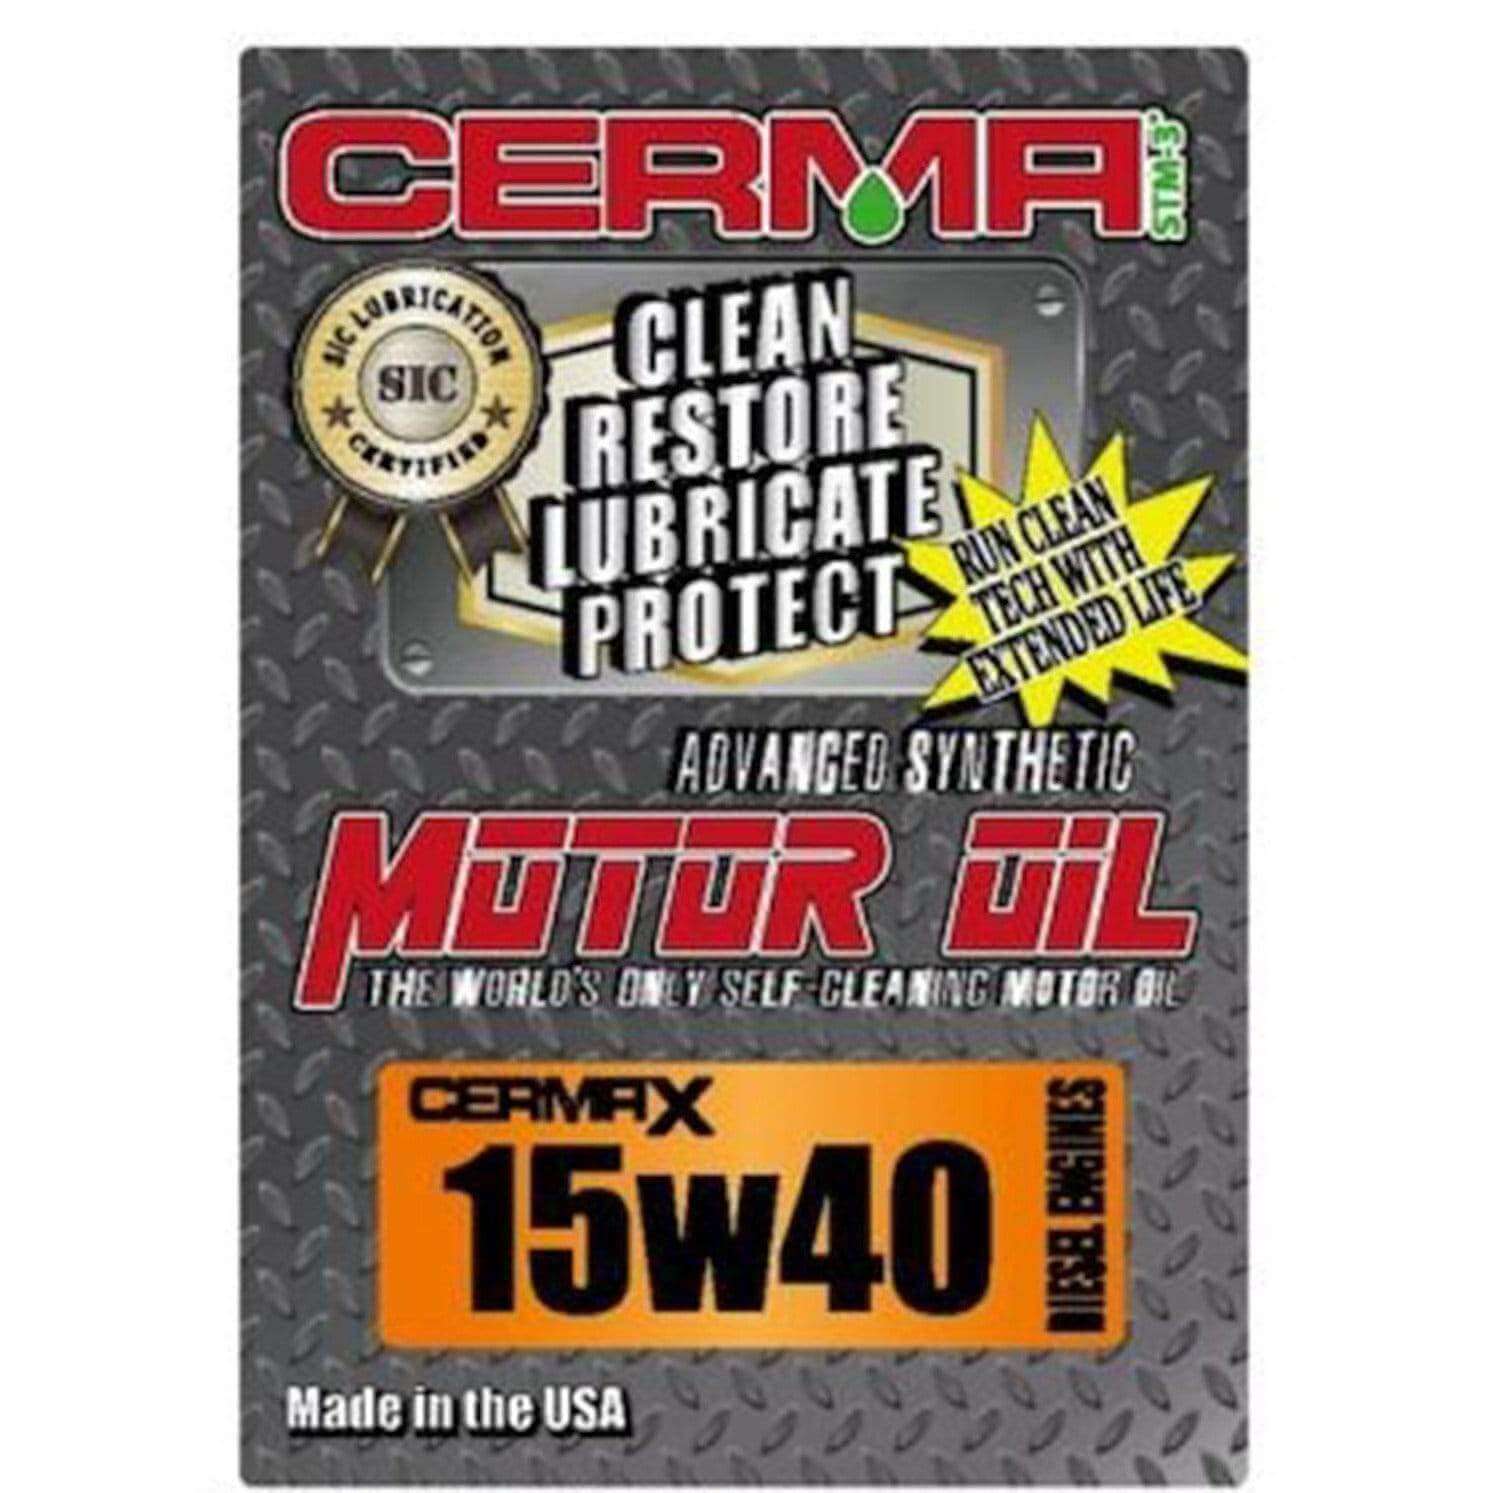 Cermax Ceramic 15w-40W Synthetic Diesel Motor Oil at $12.6 only from cermatreatment.com